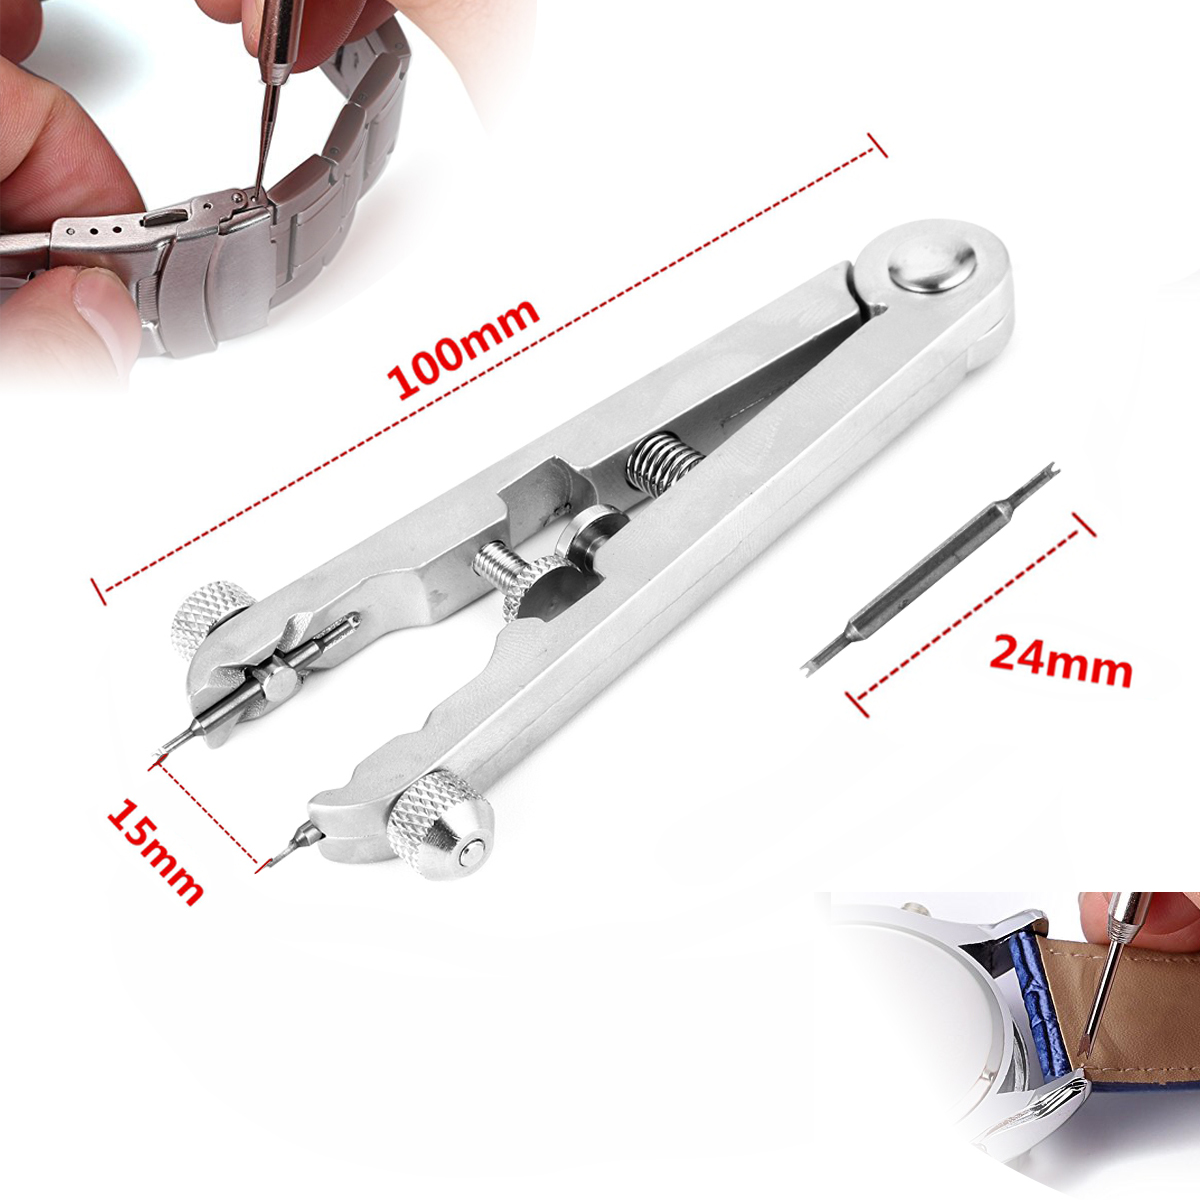 Watch-Bracelet-Spring-Bar-6825-Standard-Plier-Remover-Replace-Removing-Tool-1262786-1